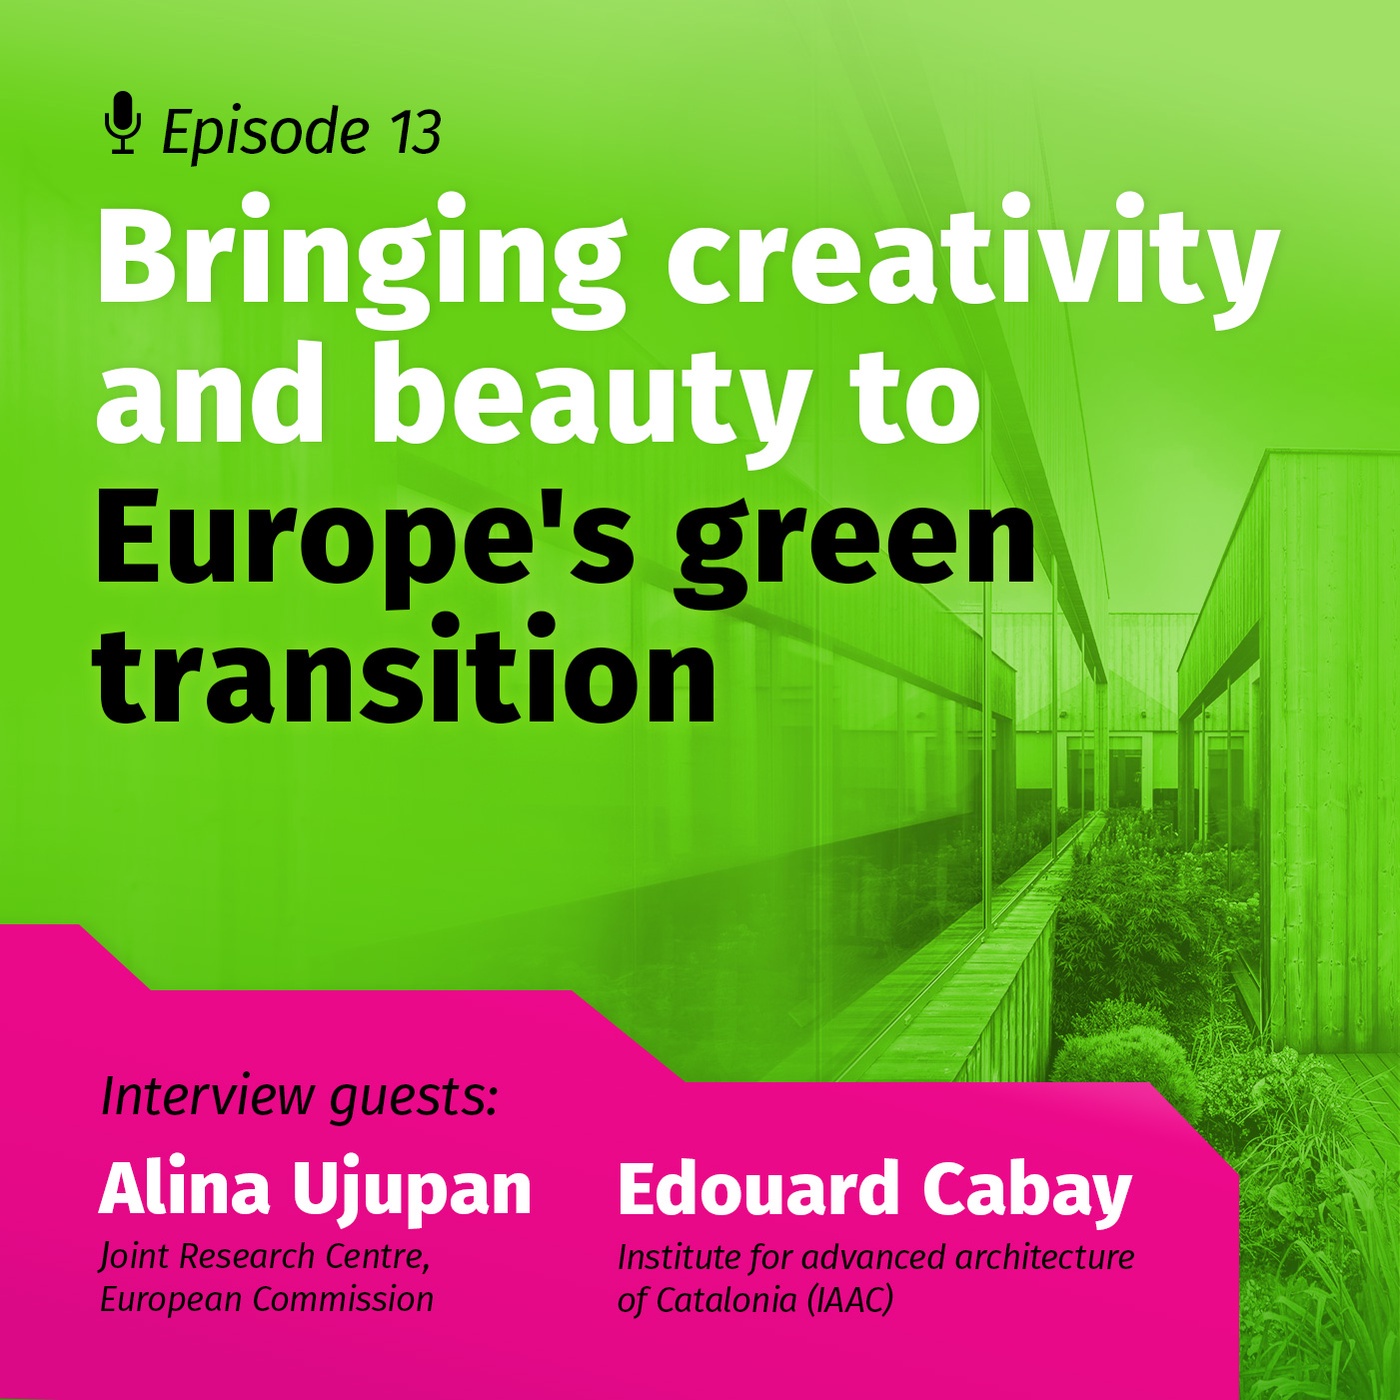 Bringing creativity and beauty to Europe's green transition